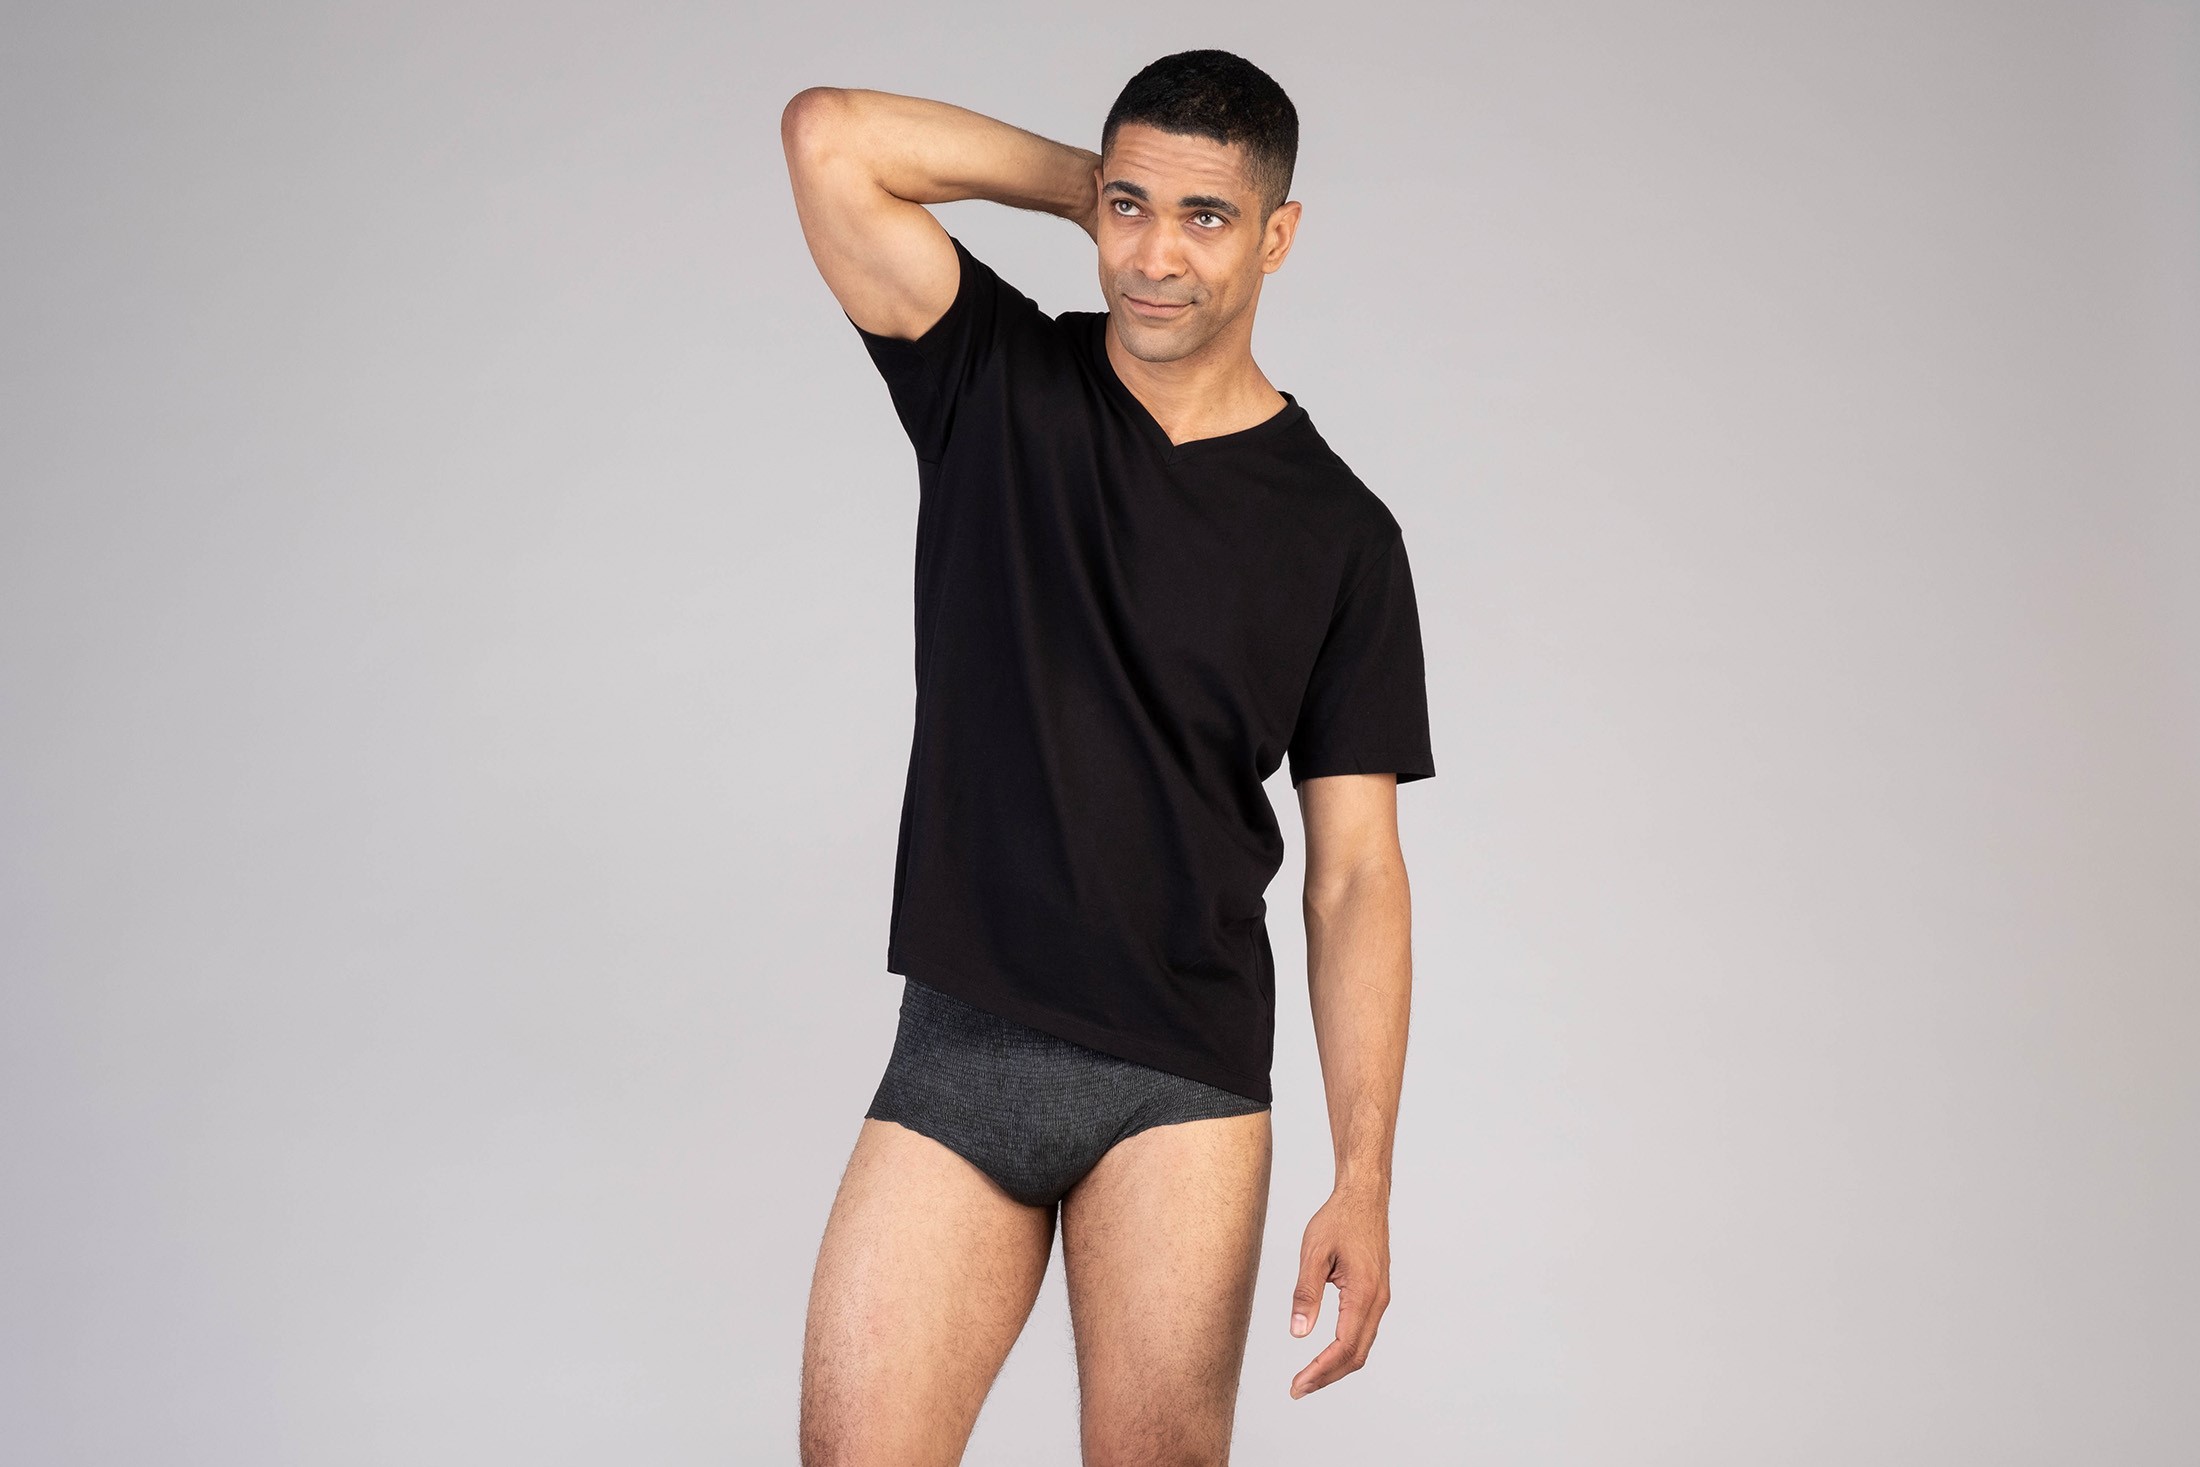 Where To Buy Men’s Incontinence Underwear